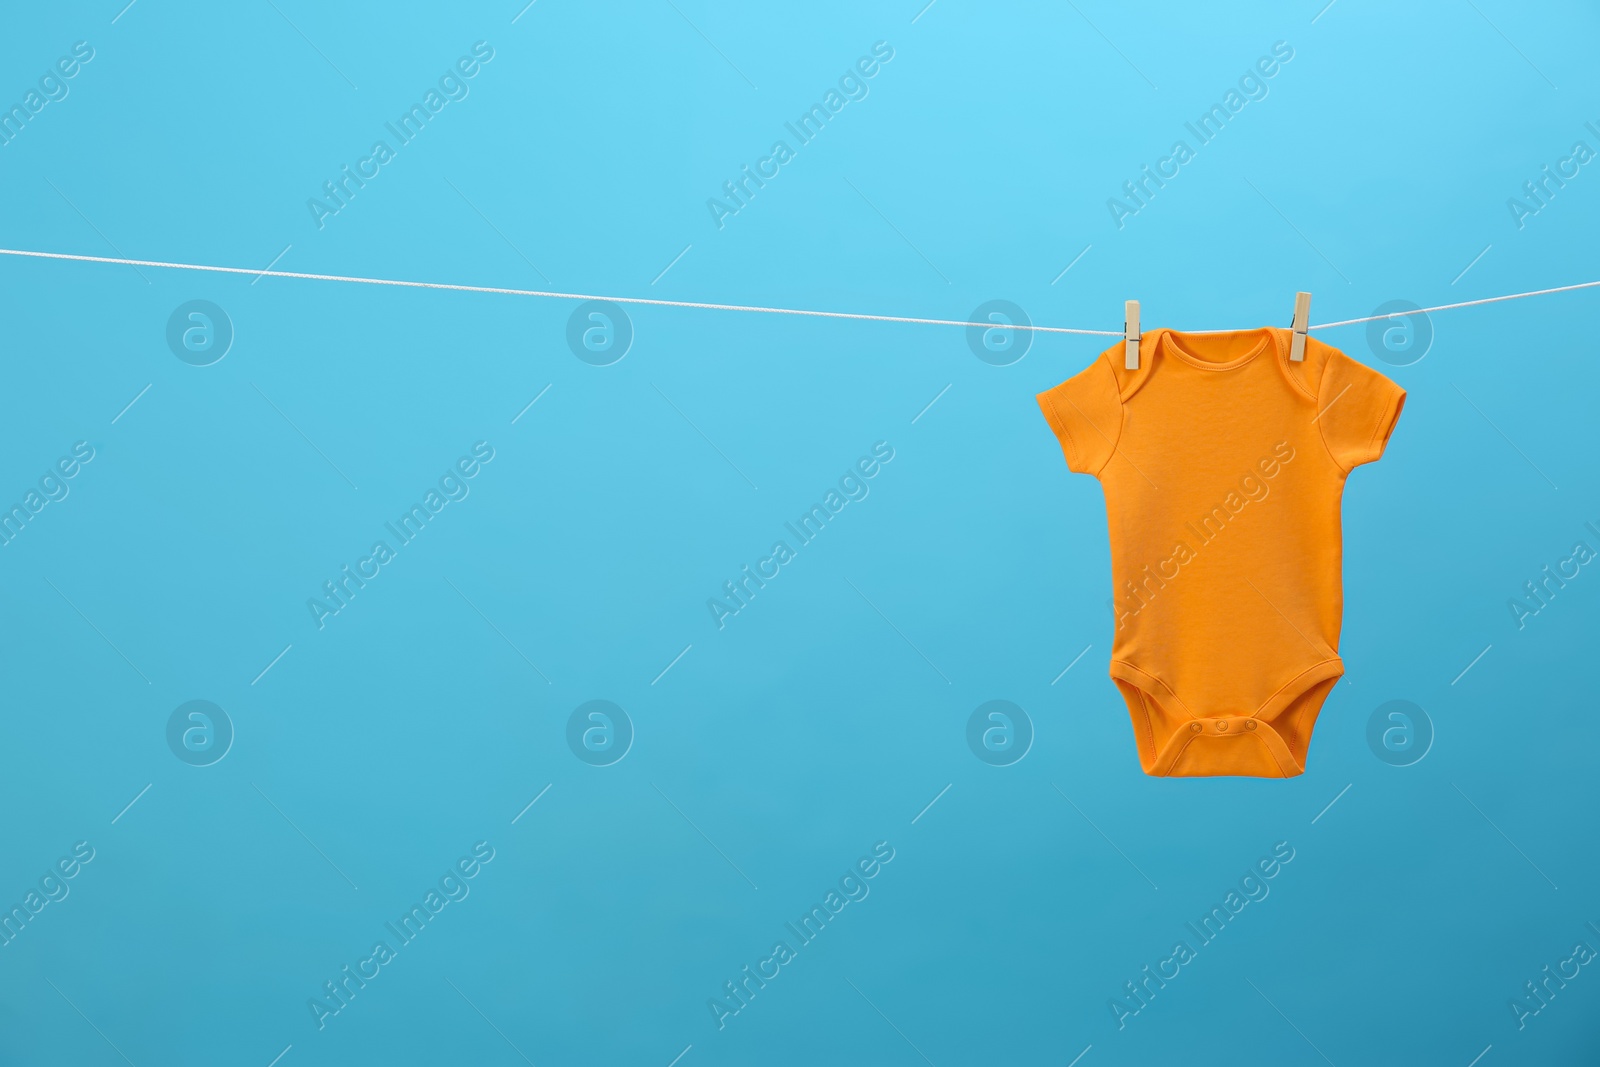 Photo of Baby onesie hanging on clothes line against blue background, space for text. Laundry day